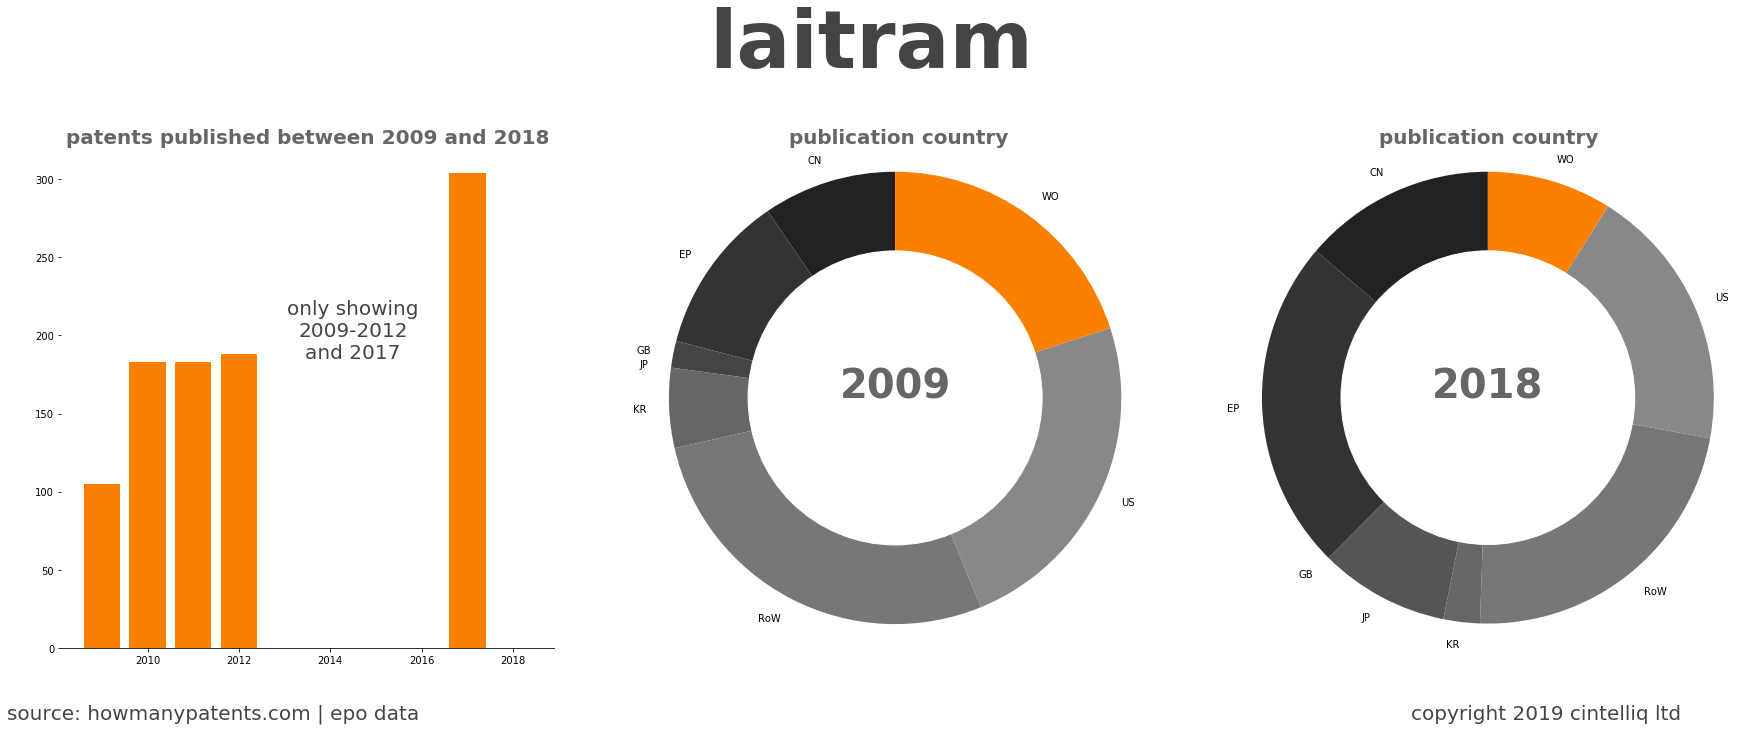 summary of patents for Laitram